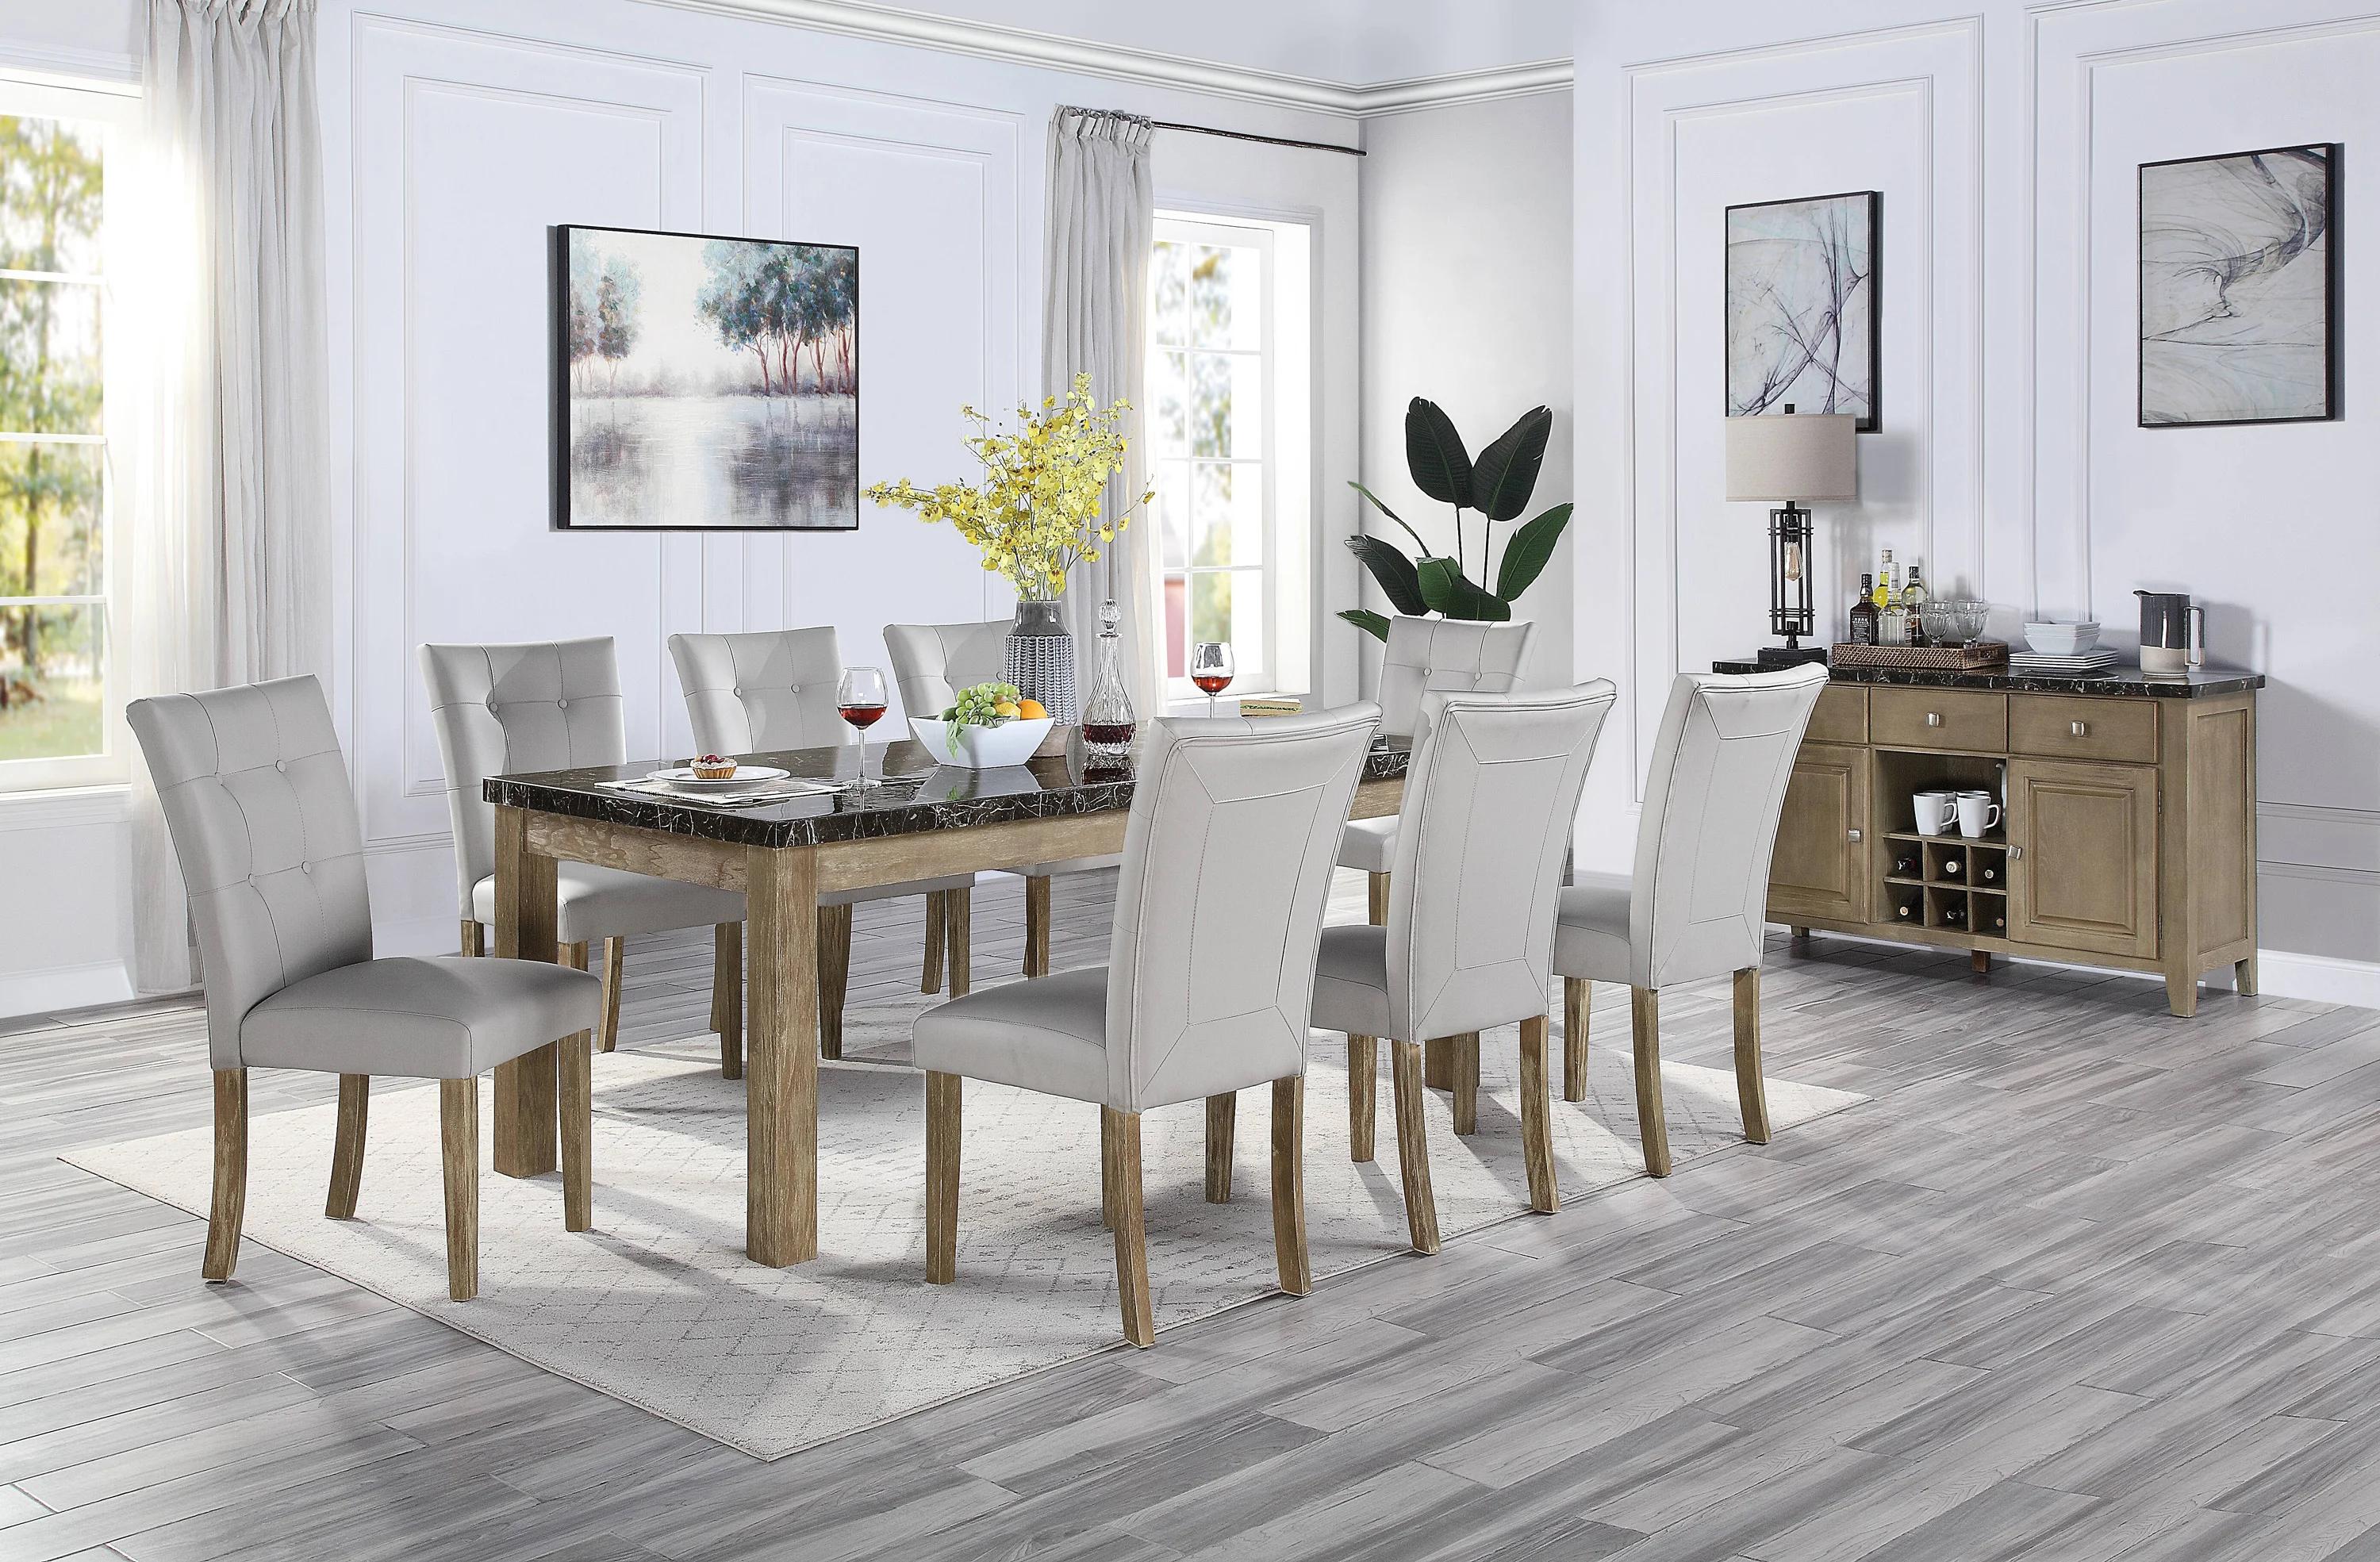 Transitional Dining Room Set Charnell DN00553-9pcs in Oak PU